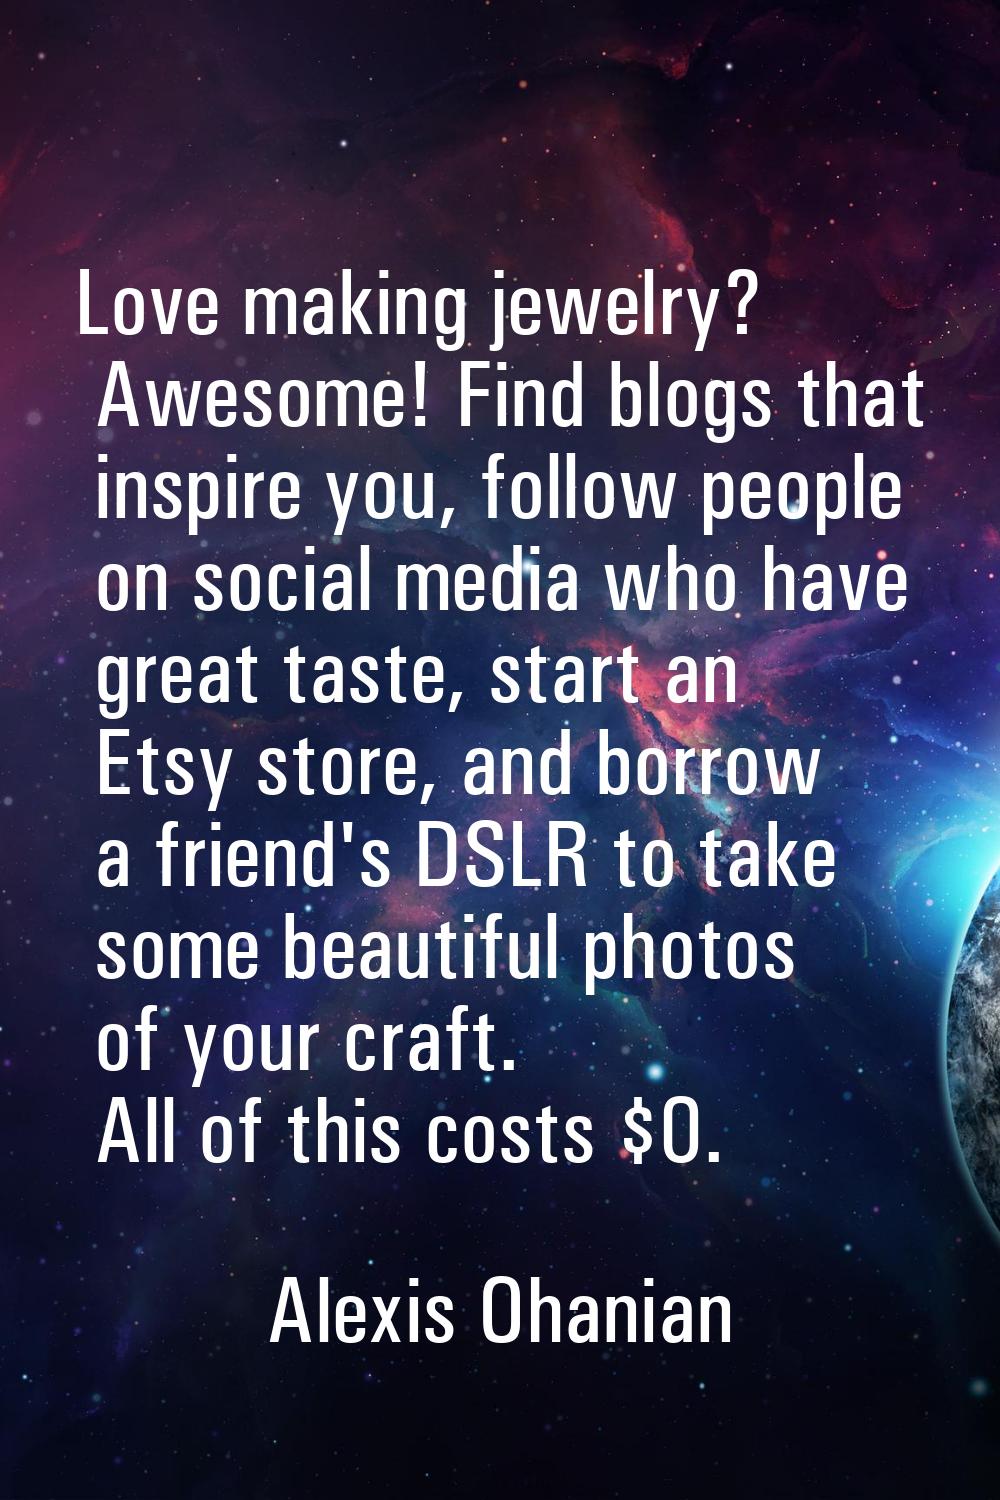 Love making jewelry? Awesome! Find blogs that inspire you, follow people on social media who have g